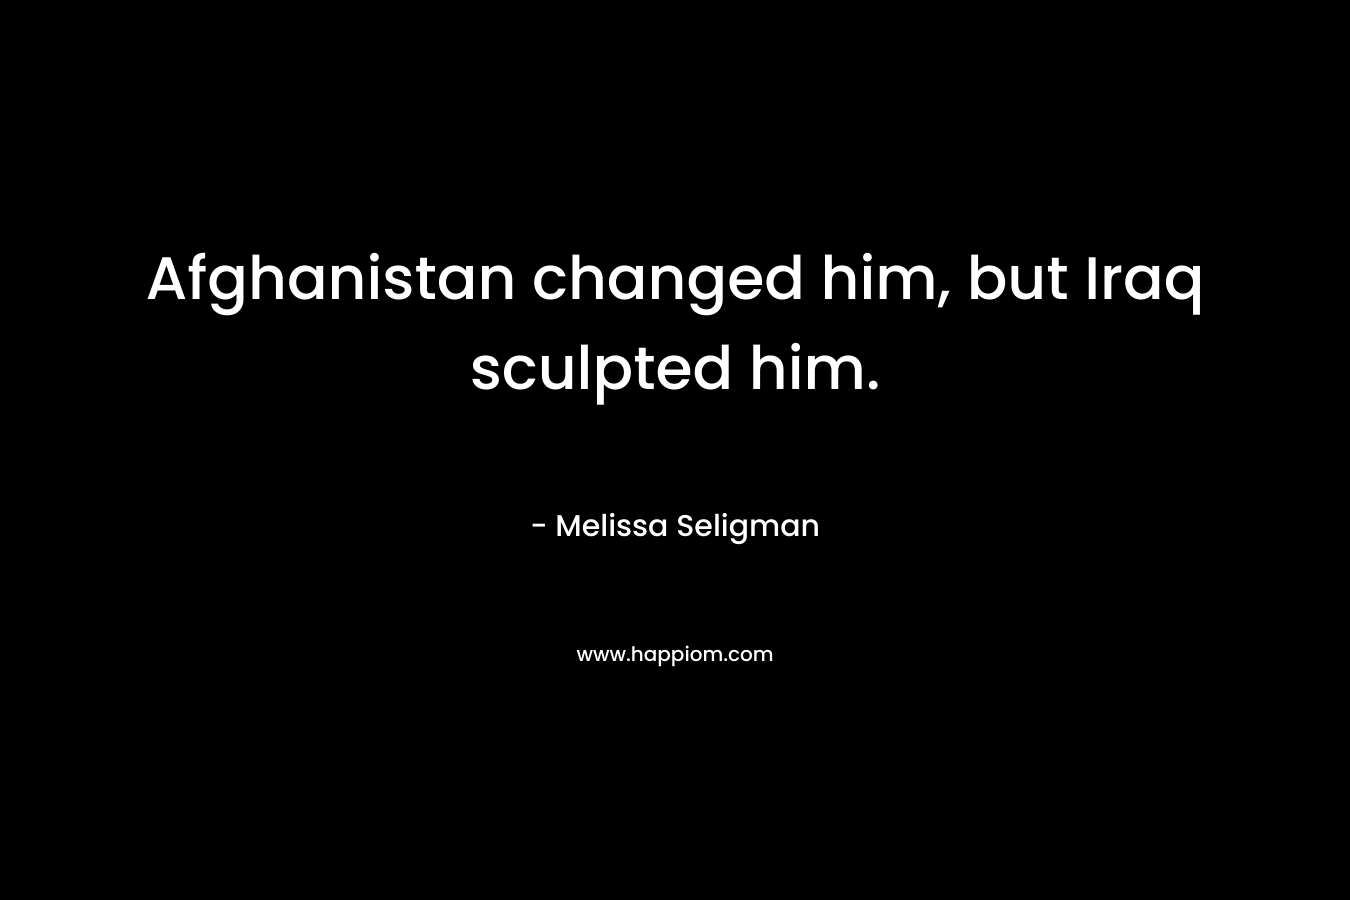 Afghanistan changed him, but Iraq sculpted him. – Melissa Seligman